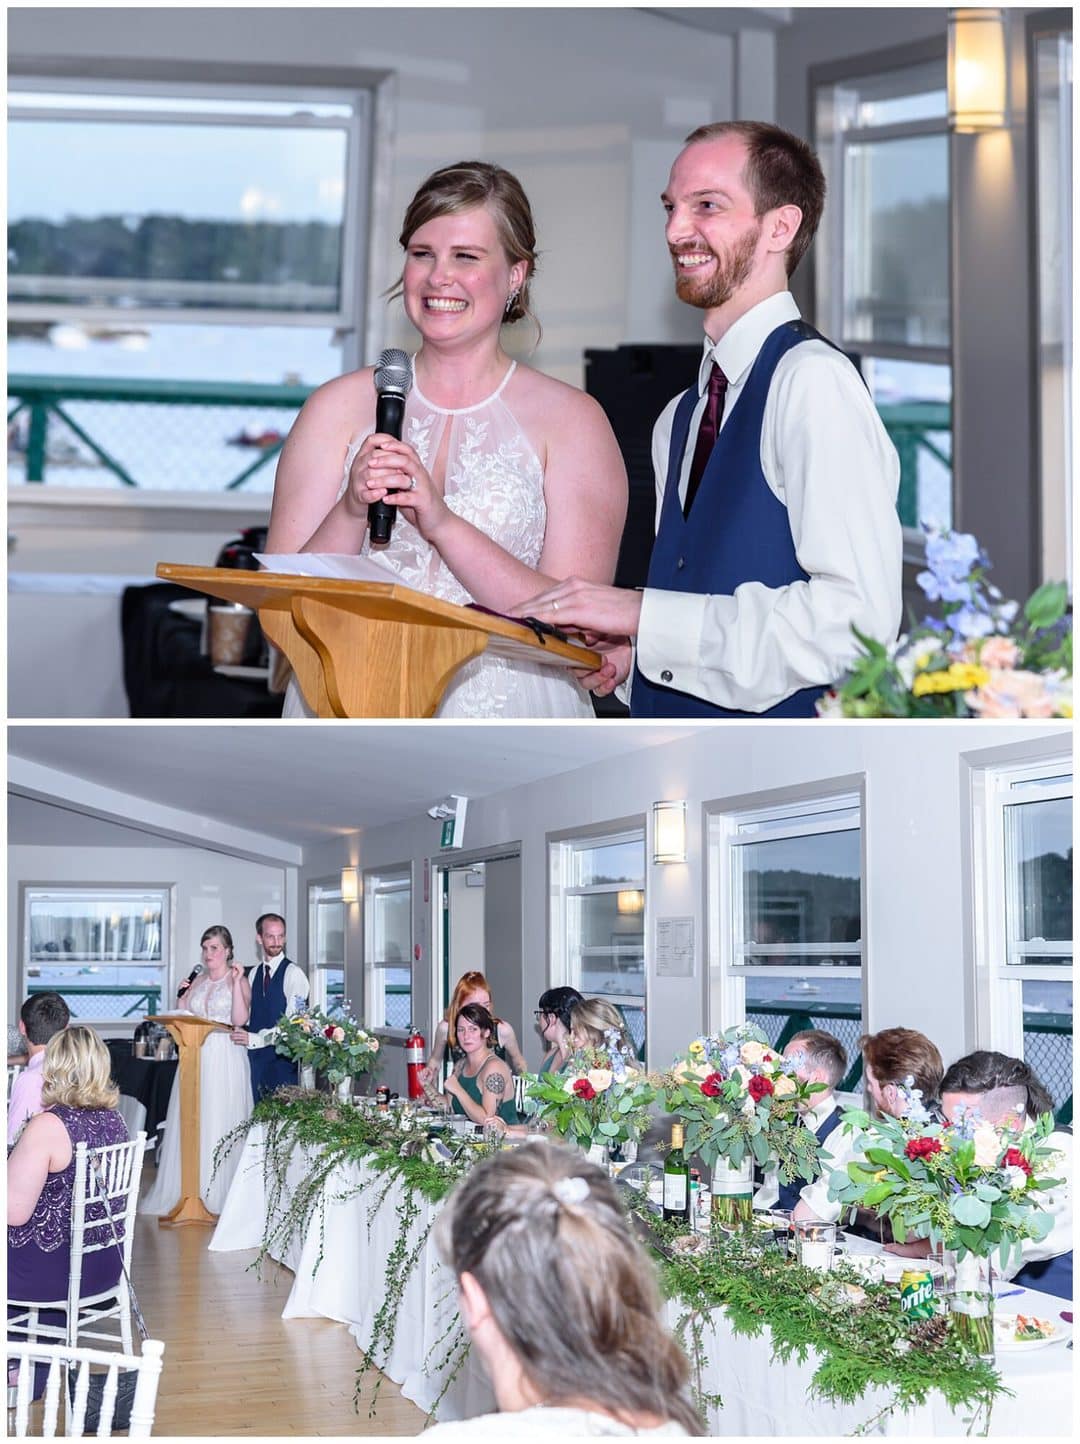 The bride and groom give their speech at the end of their wedding speeches during their reception at the St Mary's Boat Club in Halifax, NS.